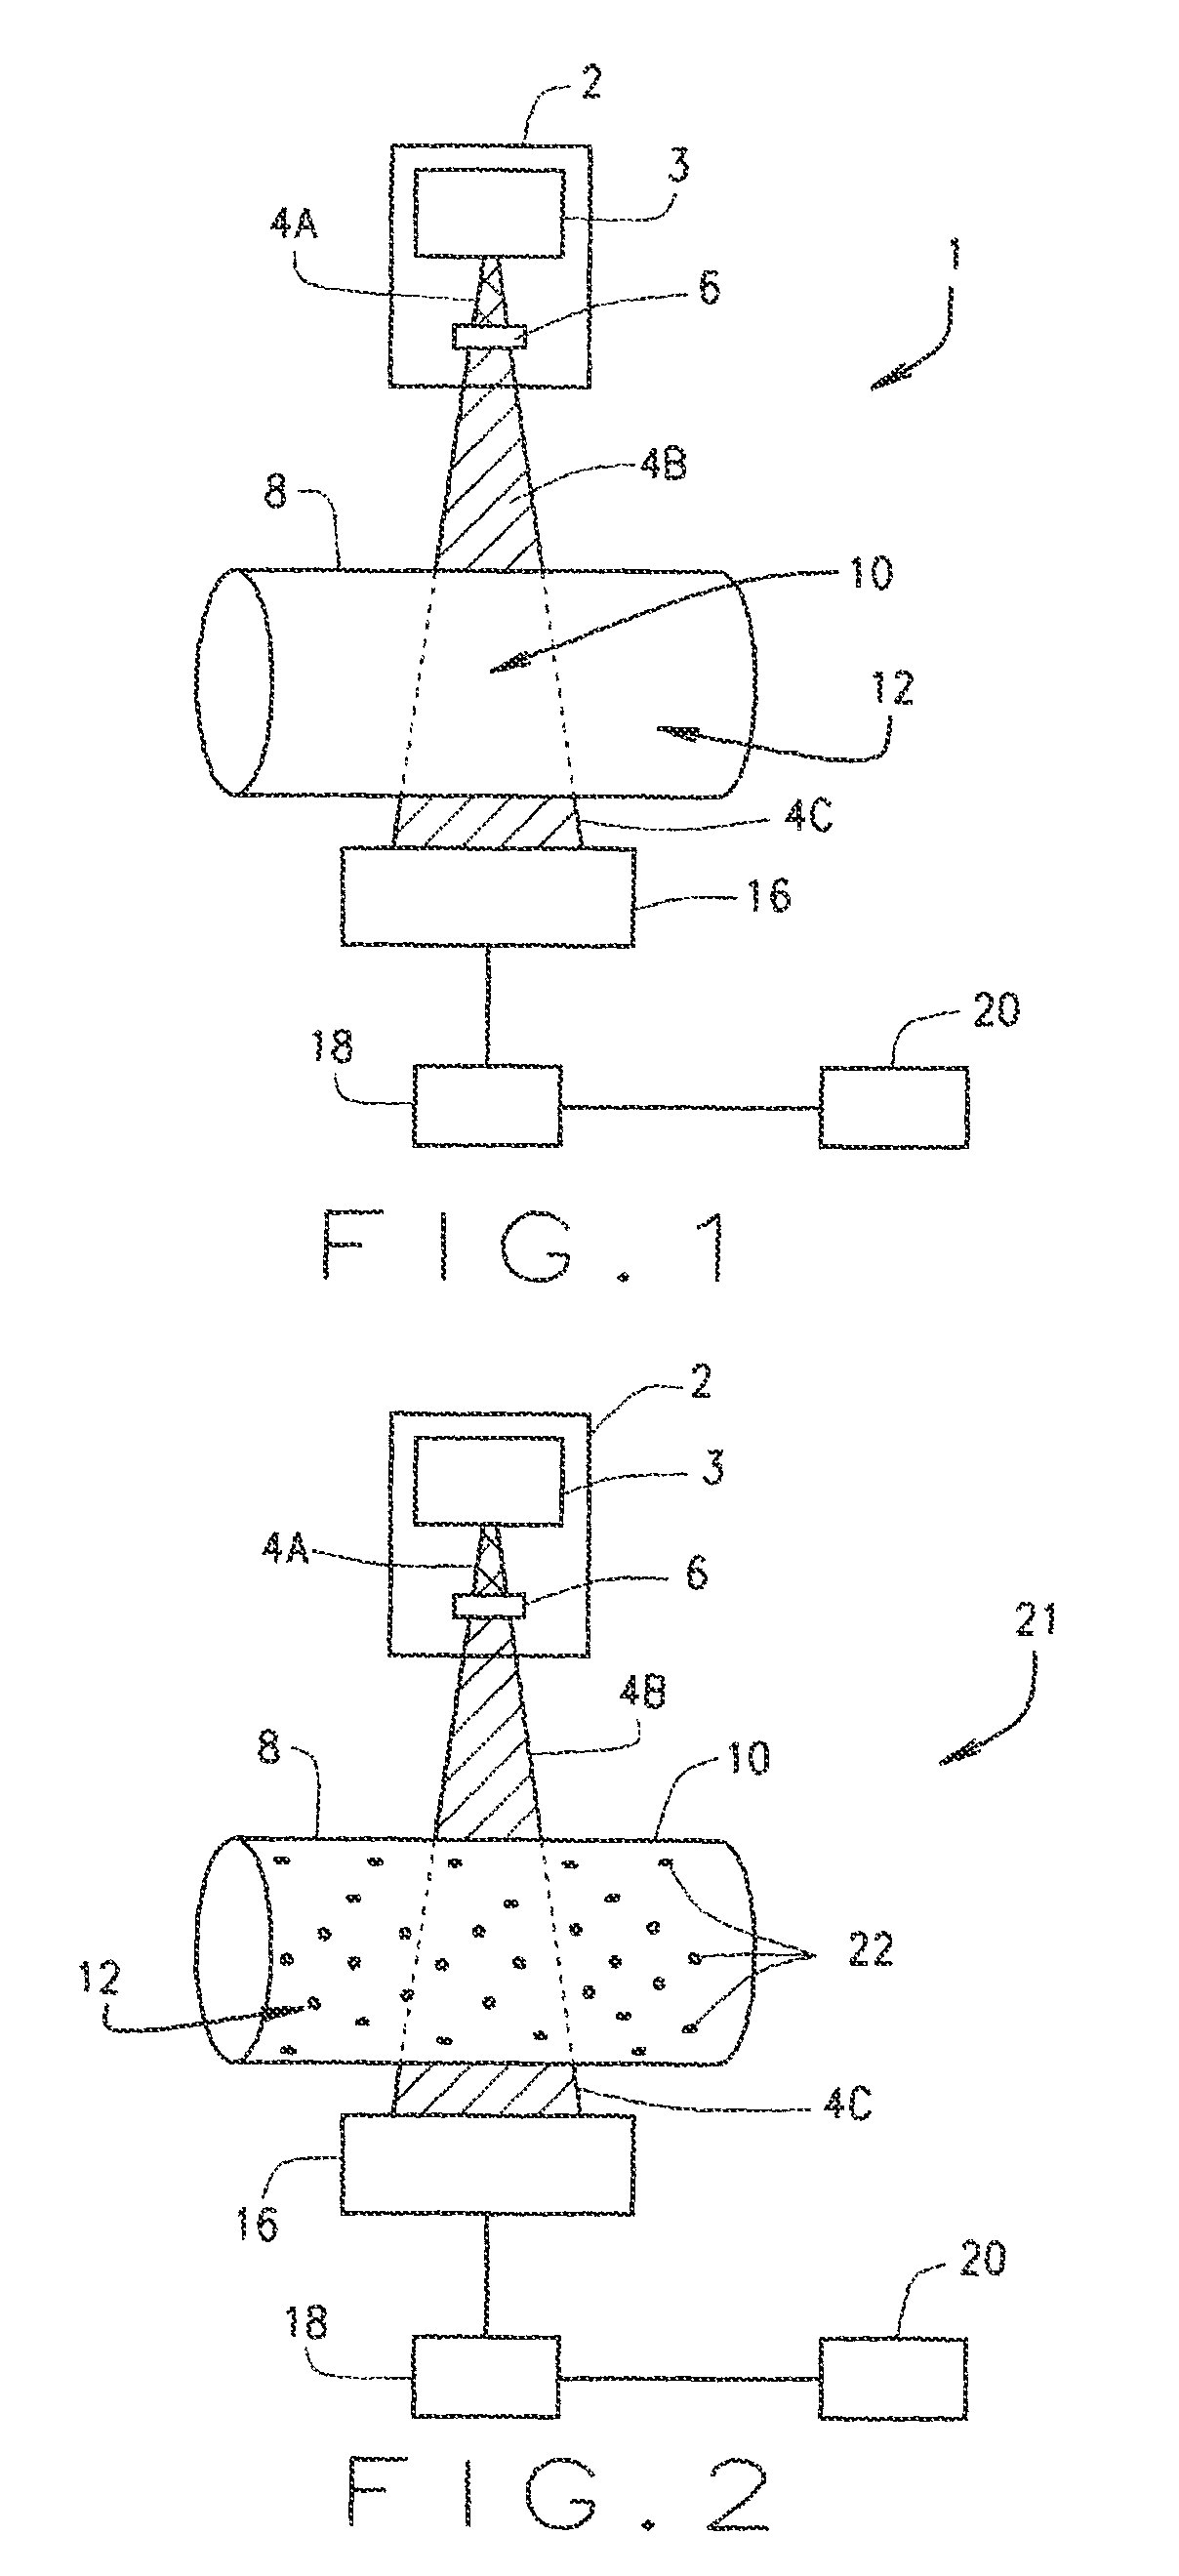 Method and apparatus for measuring enrichment of UF6